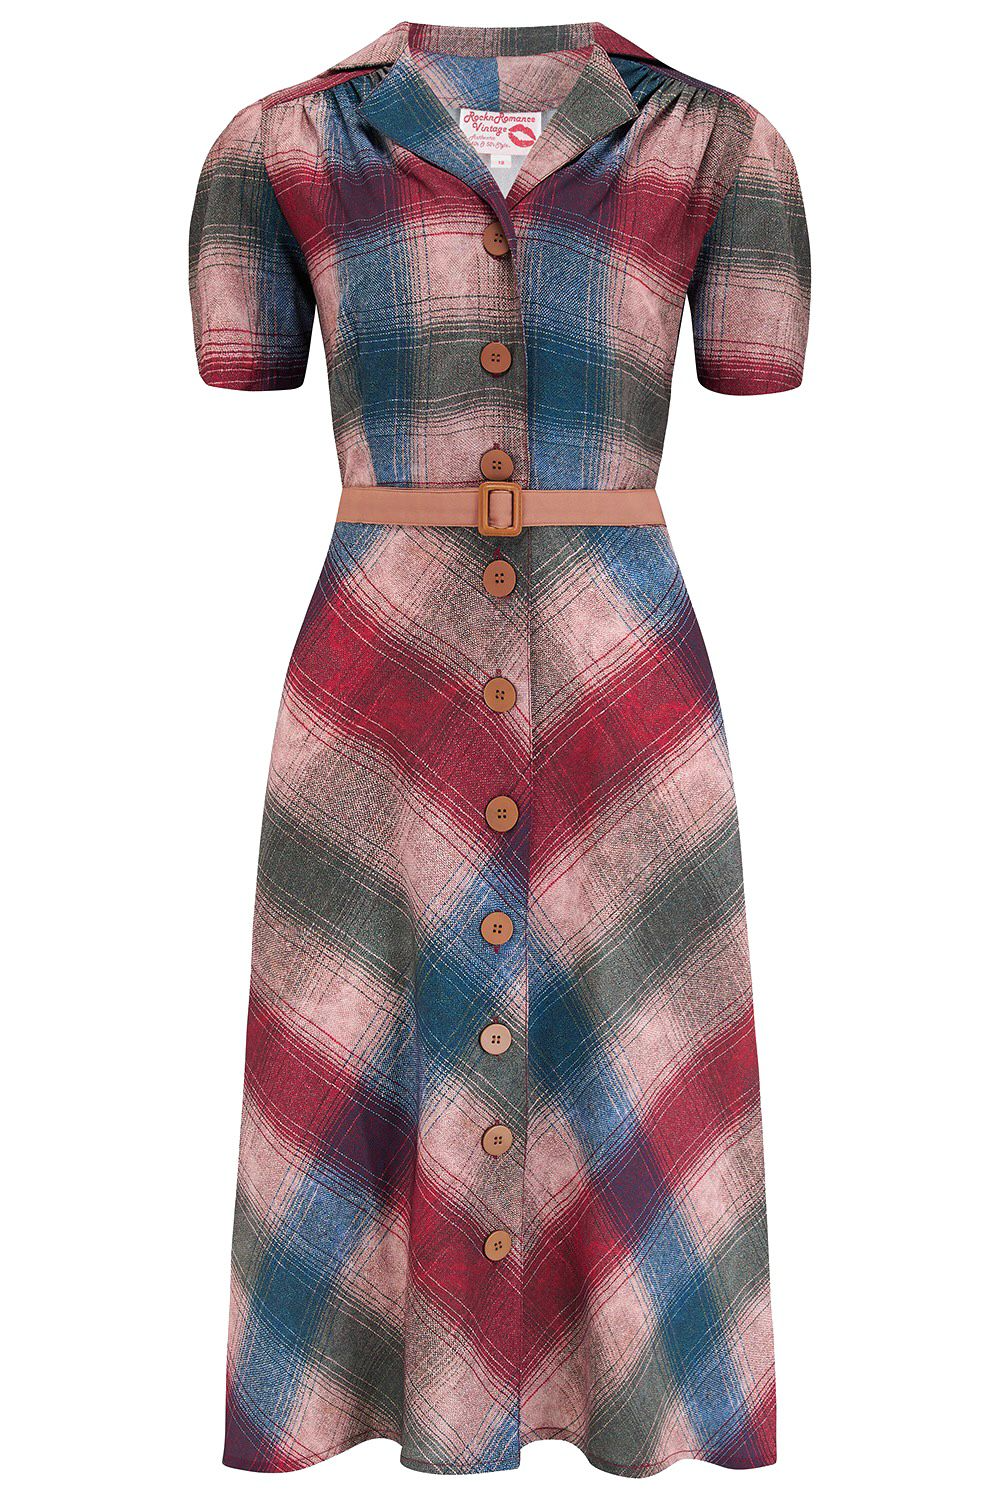 The "Charlene" Shirtwaister Dress in Cotswold Check Print, True 1950s Vintage Style product